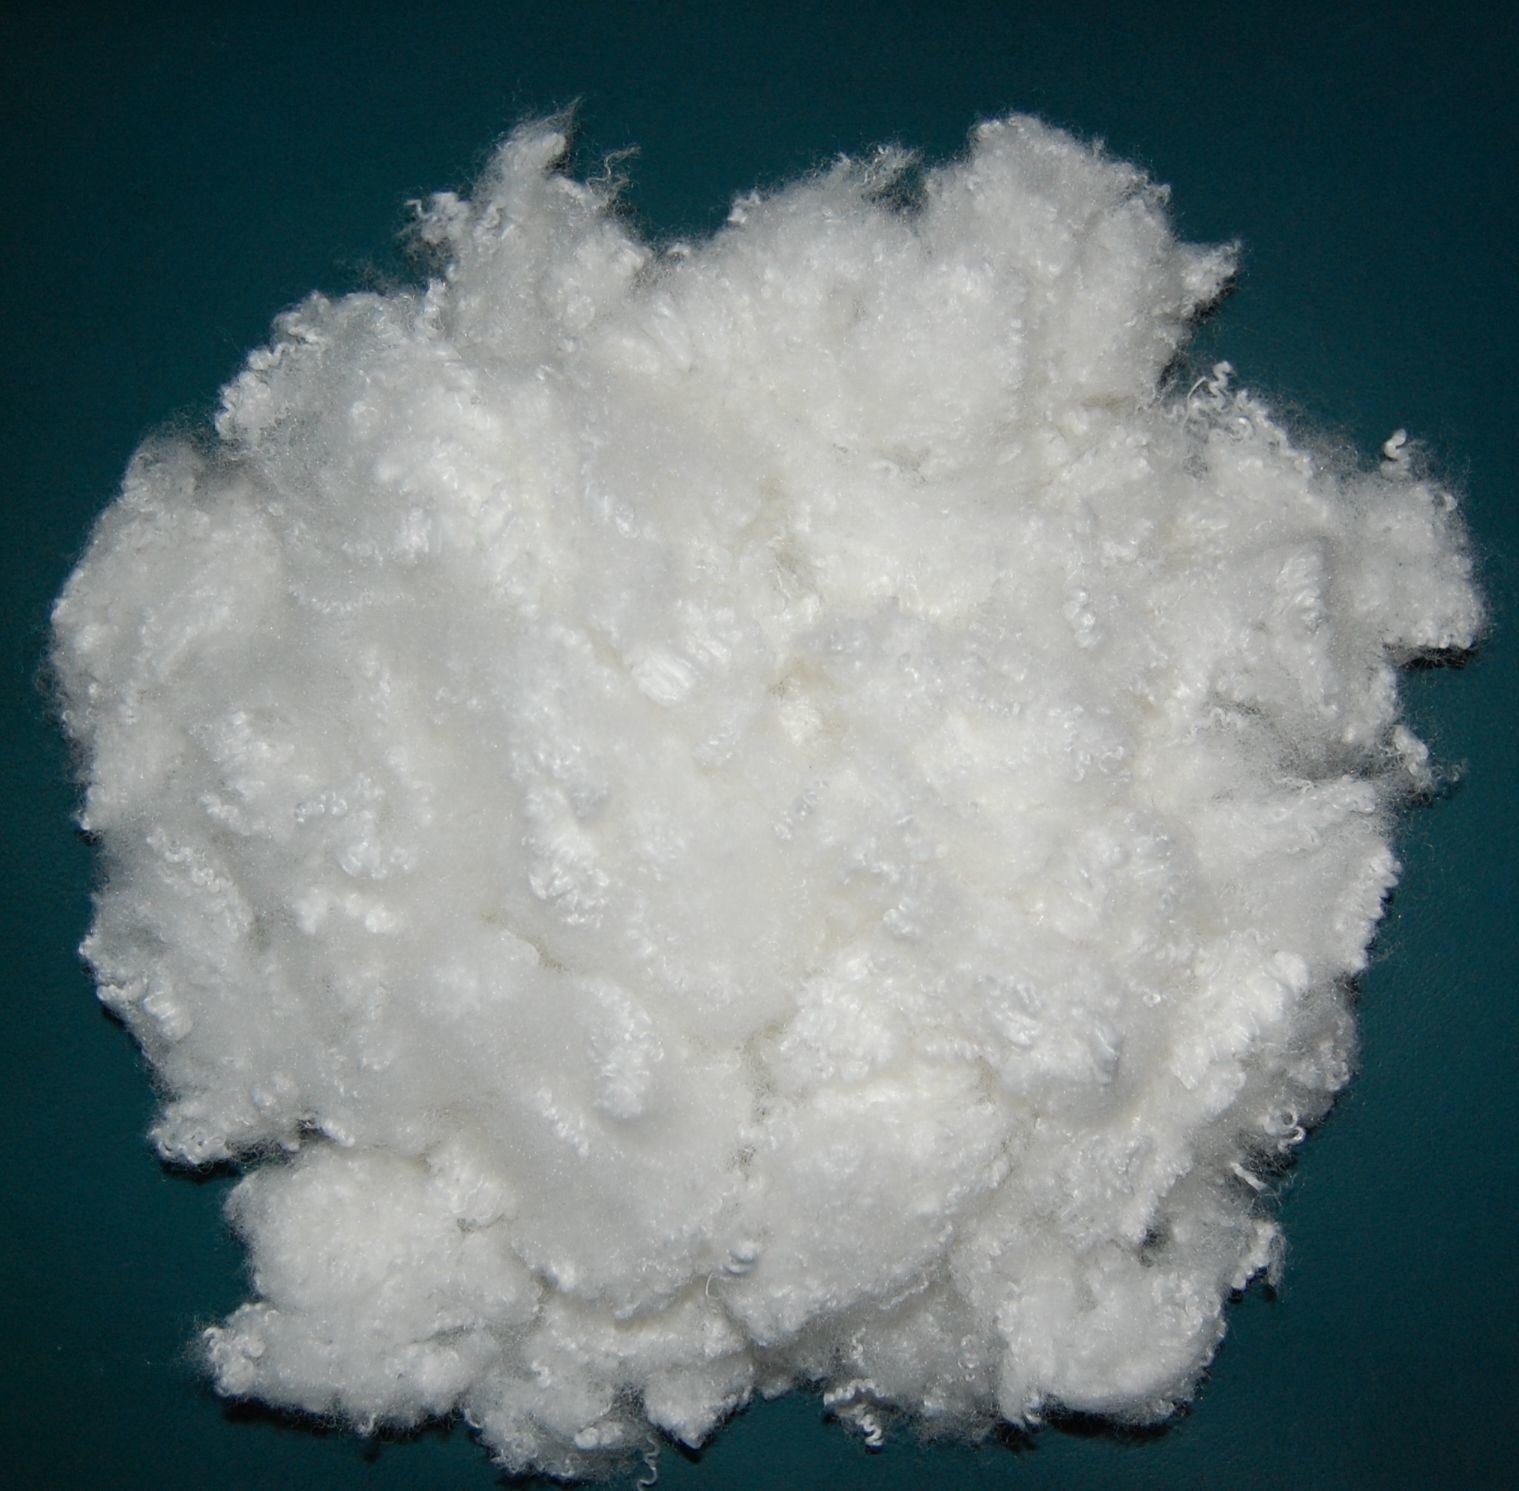 7D*76mm Hollow Conjugated Silicon Polyester Fiber  Used for Pillow, Quilt, Sofa, Suffing, Bedding